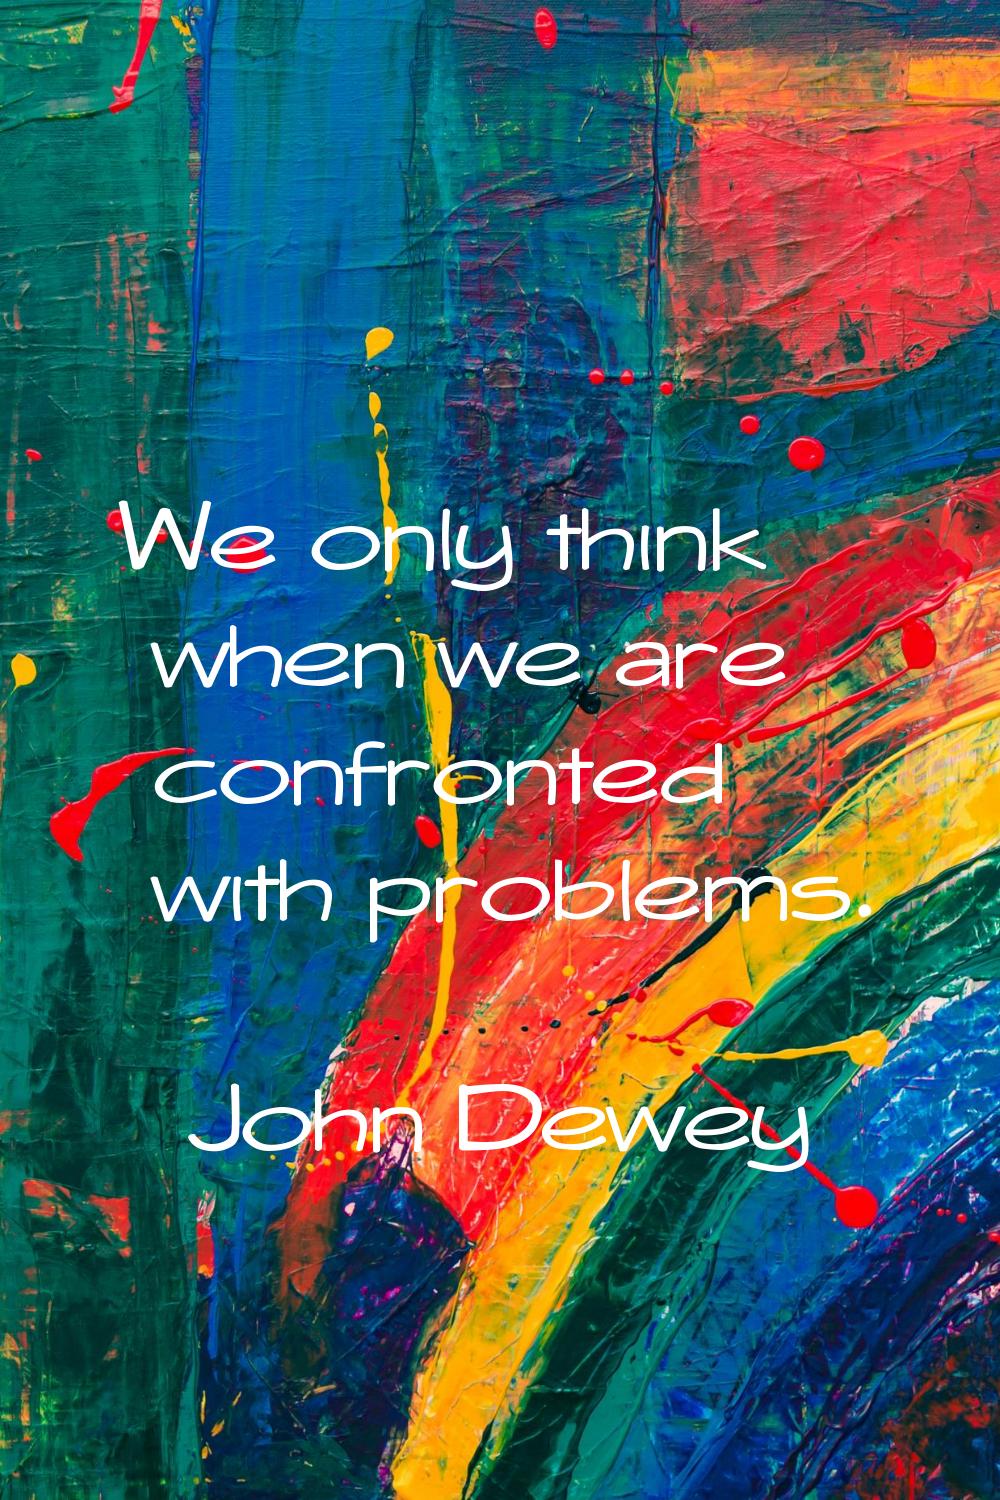 We only think when we are confronted with problems.